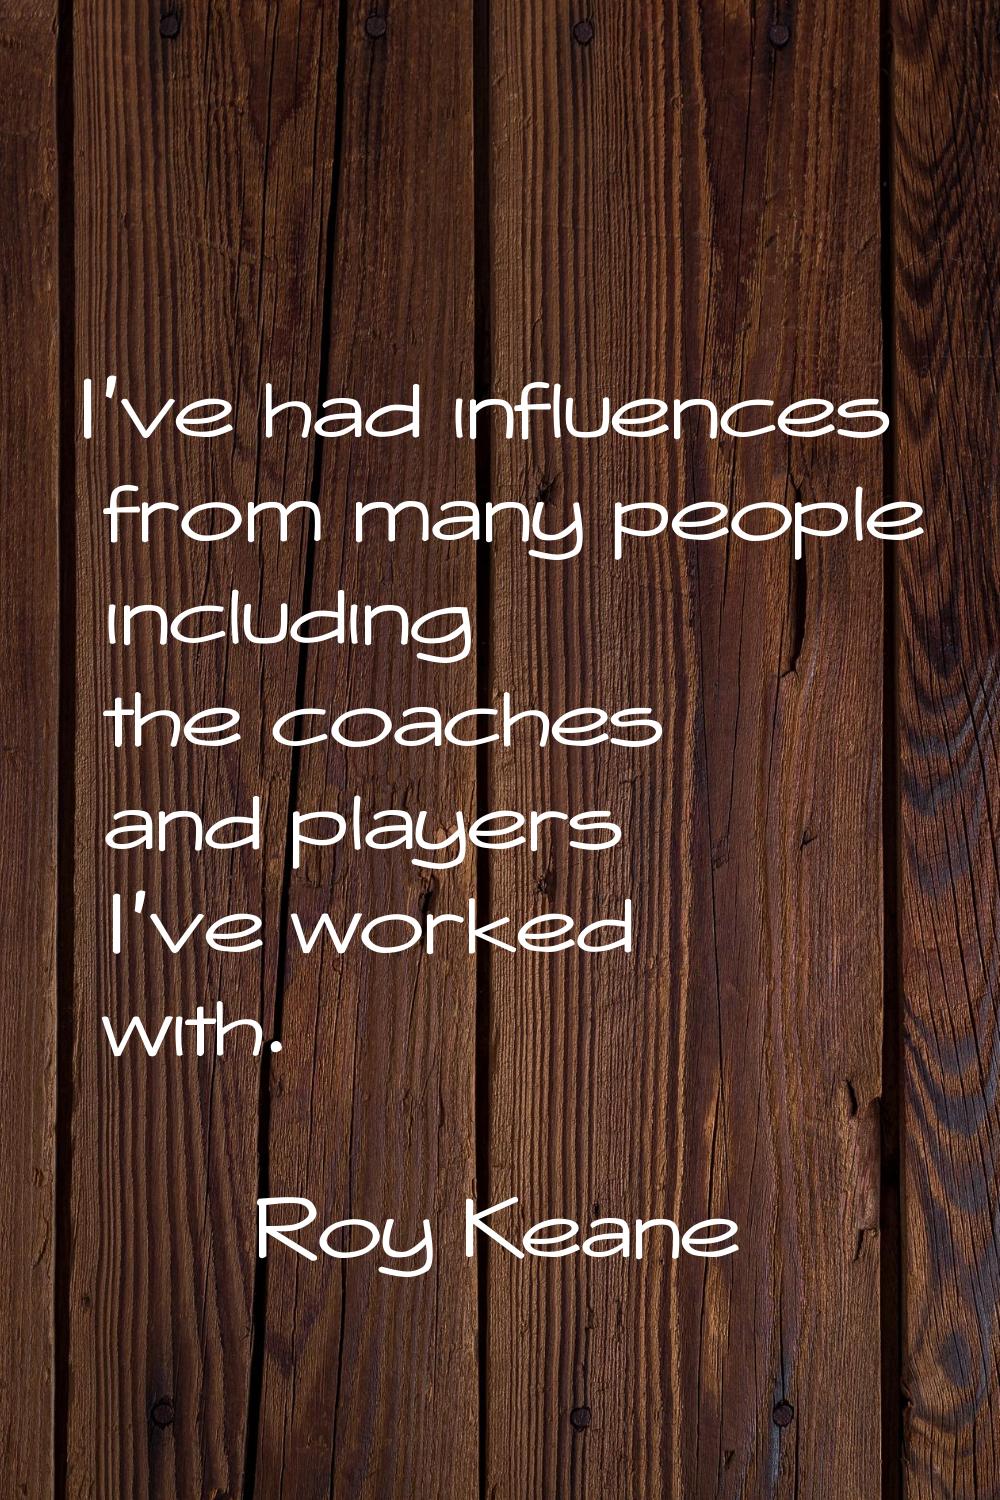 I've had influences from many people including the coaches and players I've worked with.